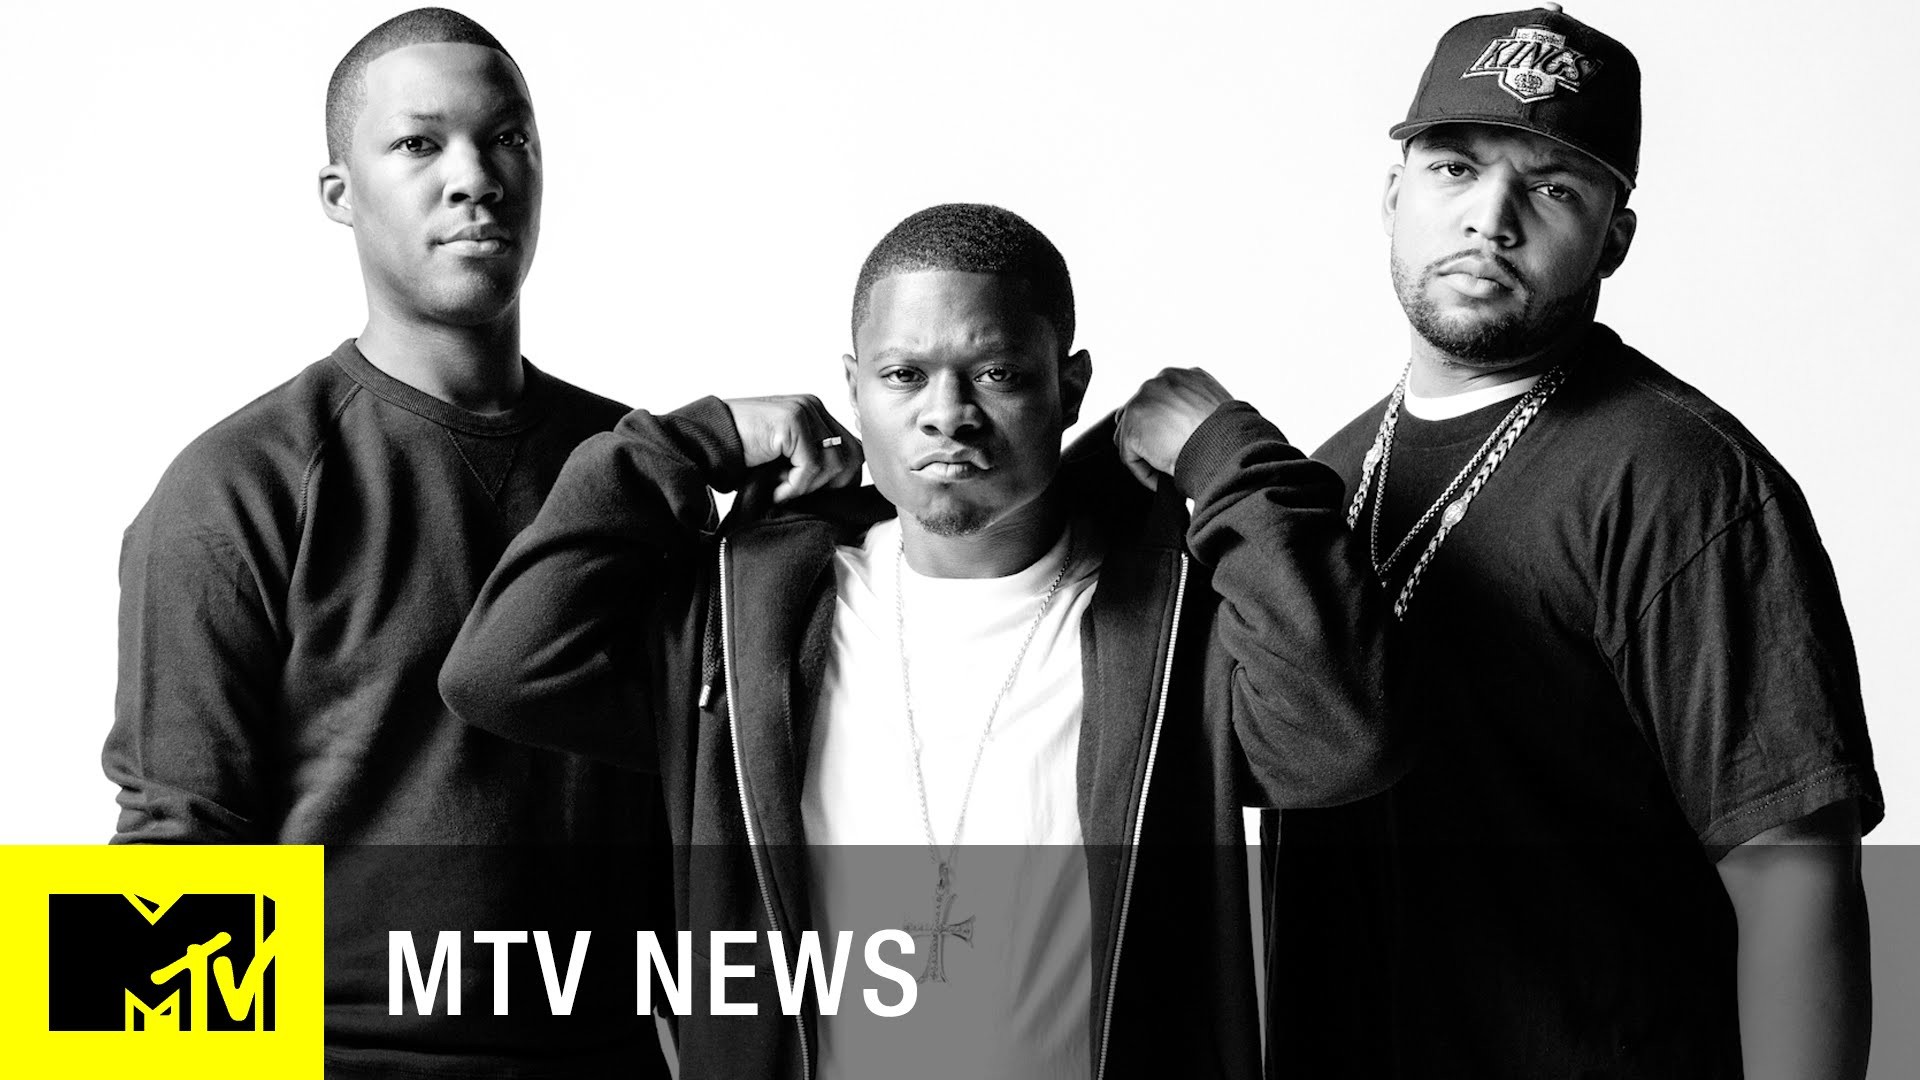 1920x1080 How Did The 'Straight Outta Compton' Cast Transform Into N.W.A.? | MTV News  - YouTube